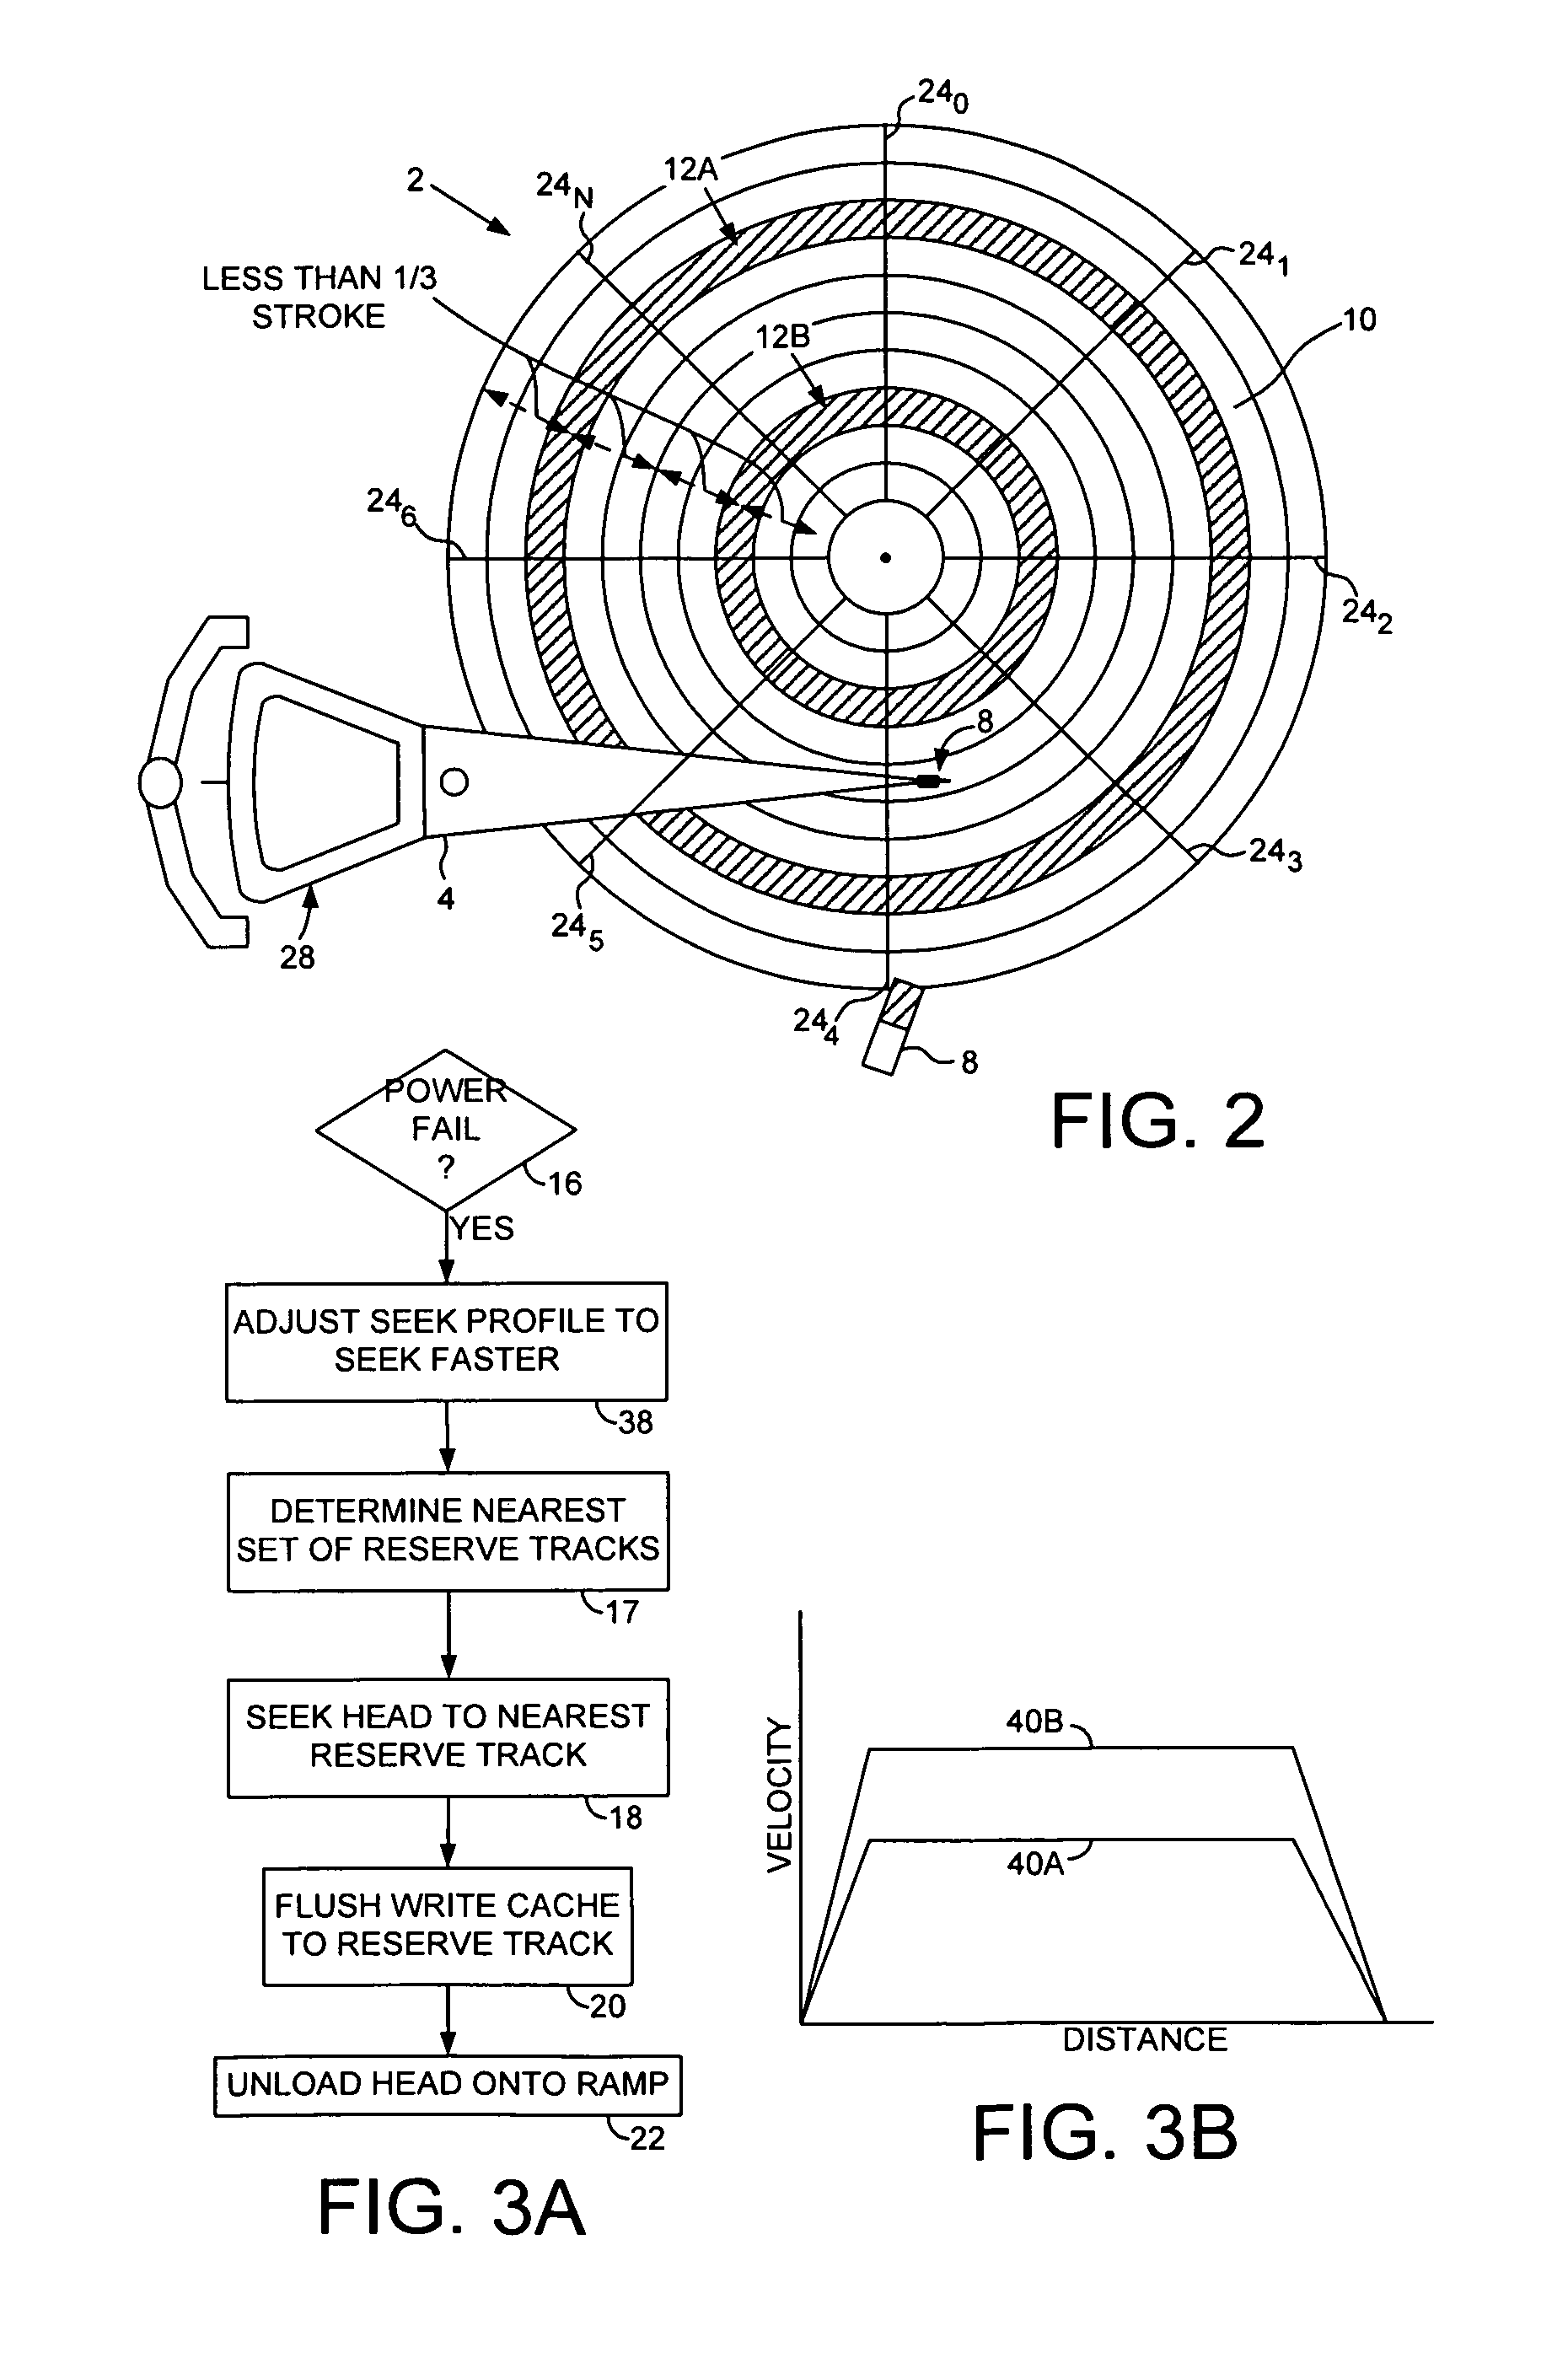 Disk drive flushing write cache to a nearest set of reserved tracks during a power failure